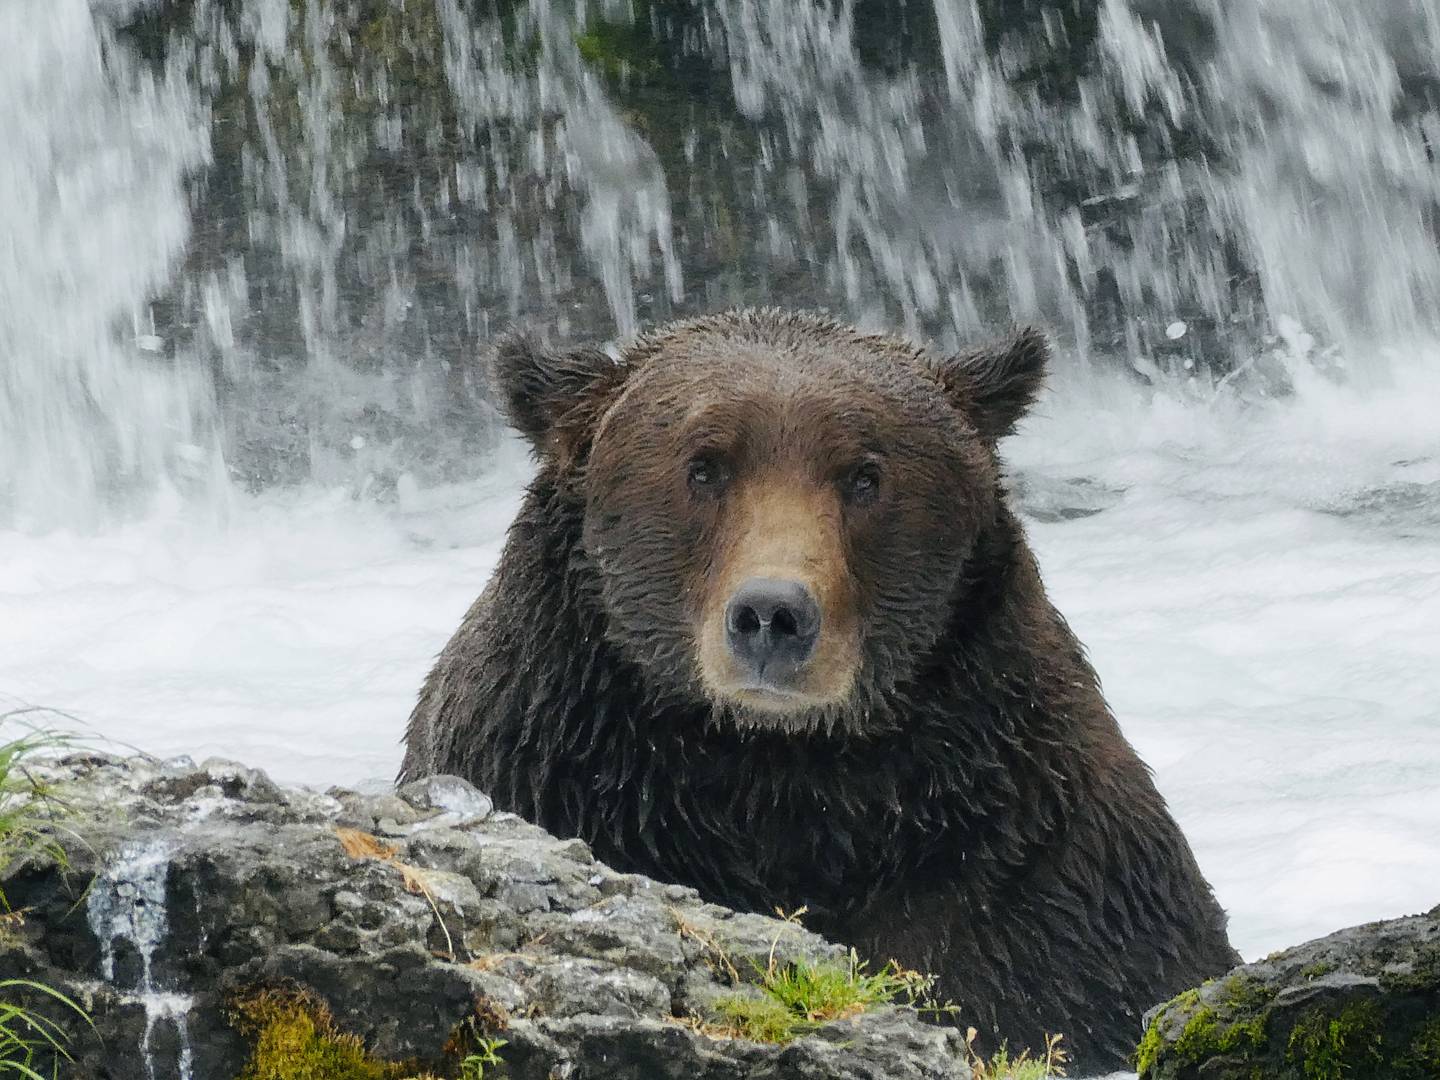 Katmai National Park, famous for bear viewing, is accepting summer